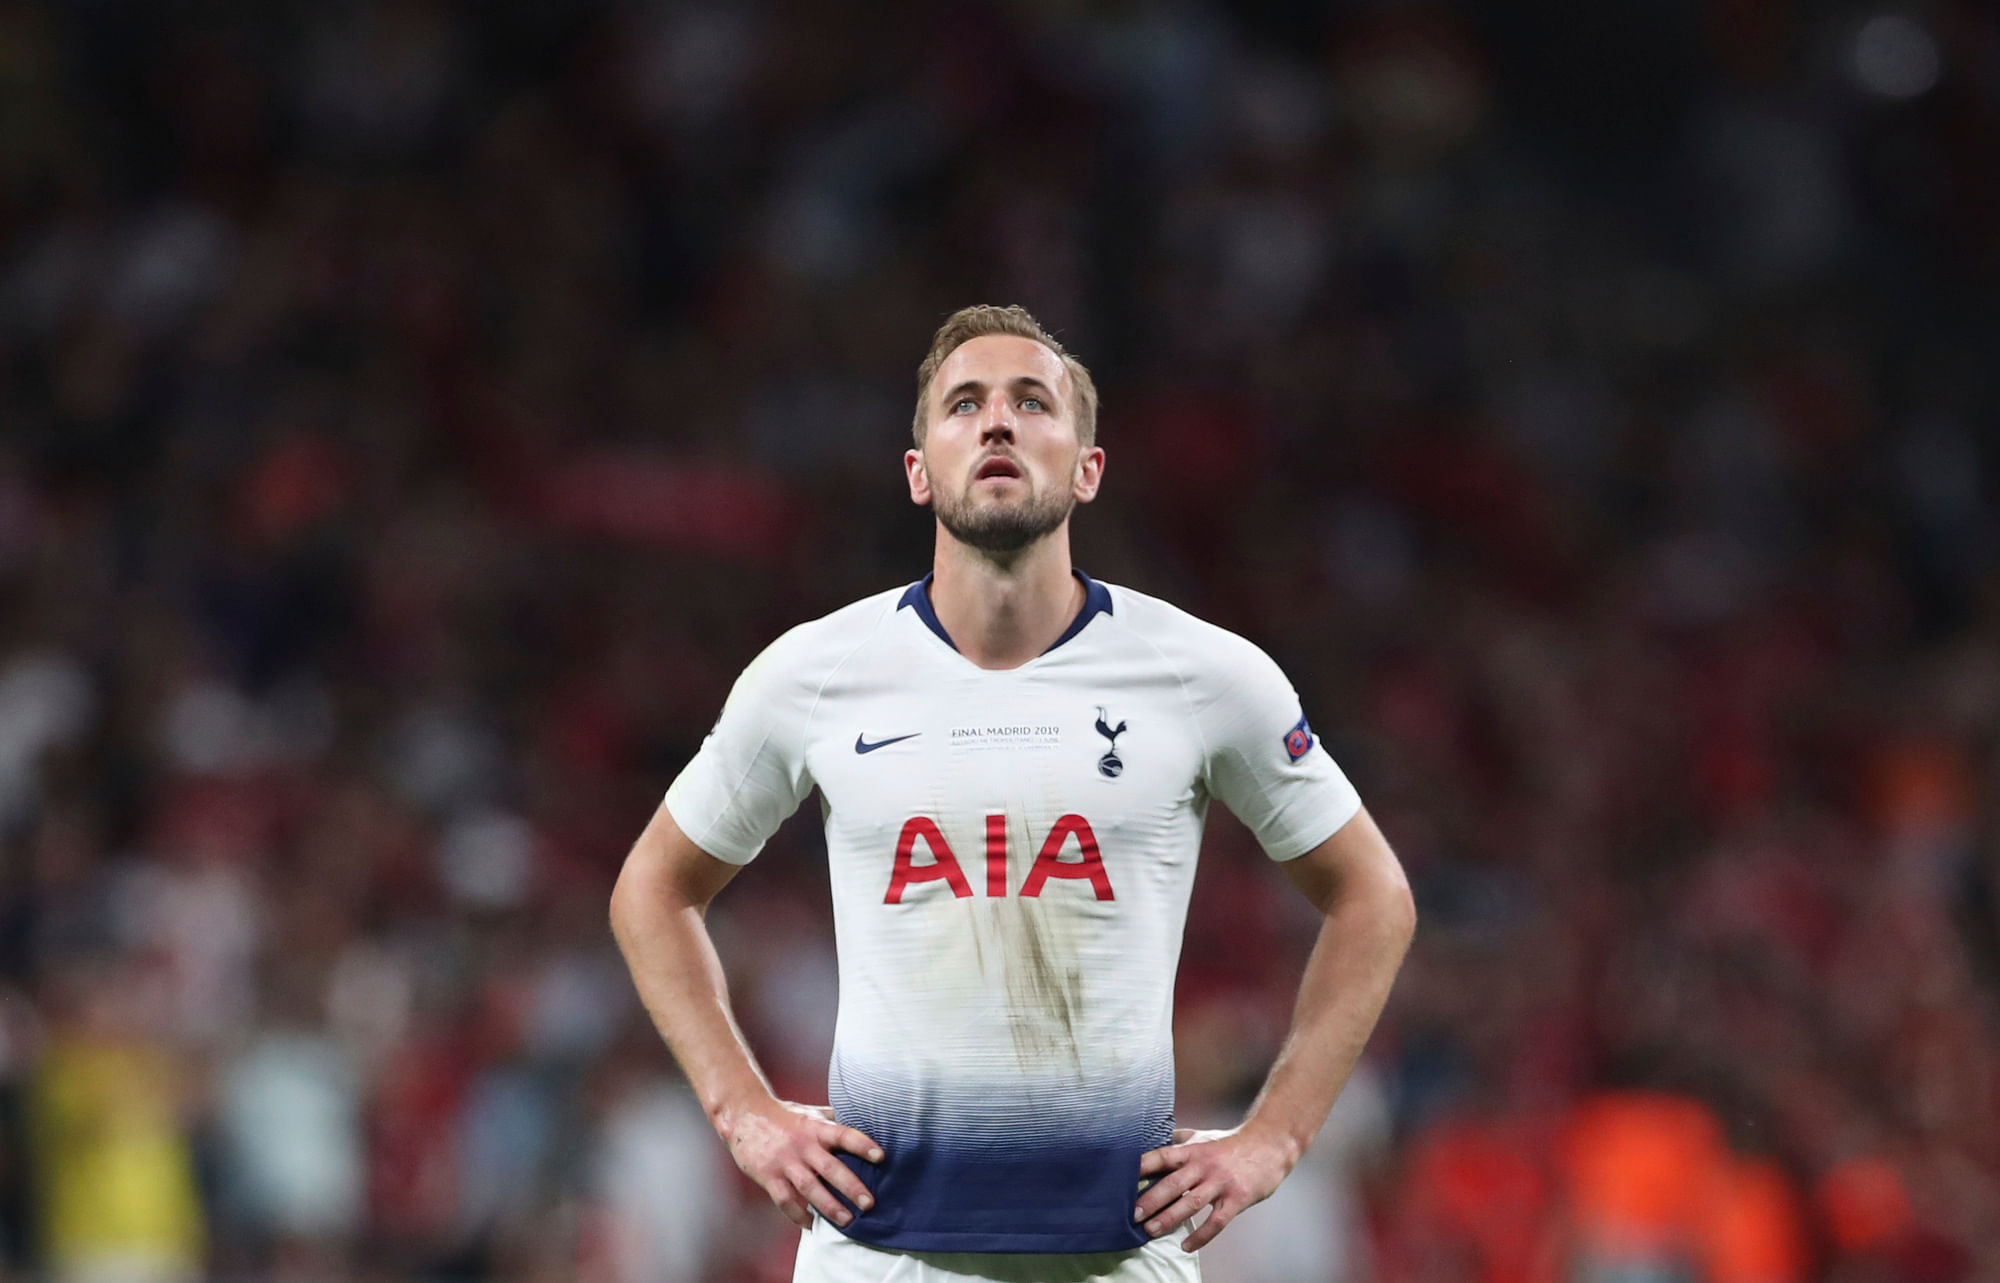 Kane was back in the squad for the first time since April when he was injured in the first leg of the quarterfinals.